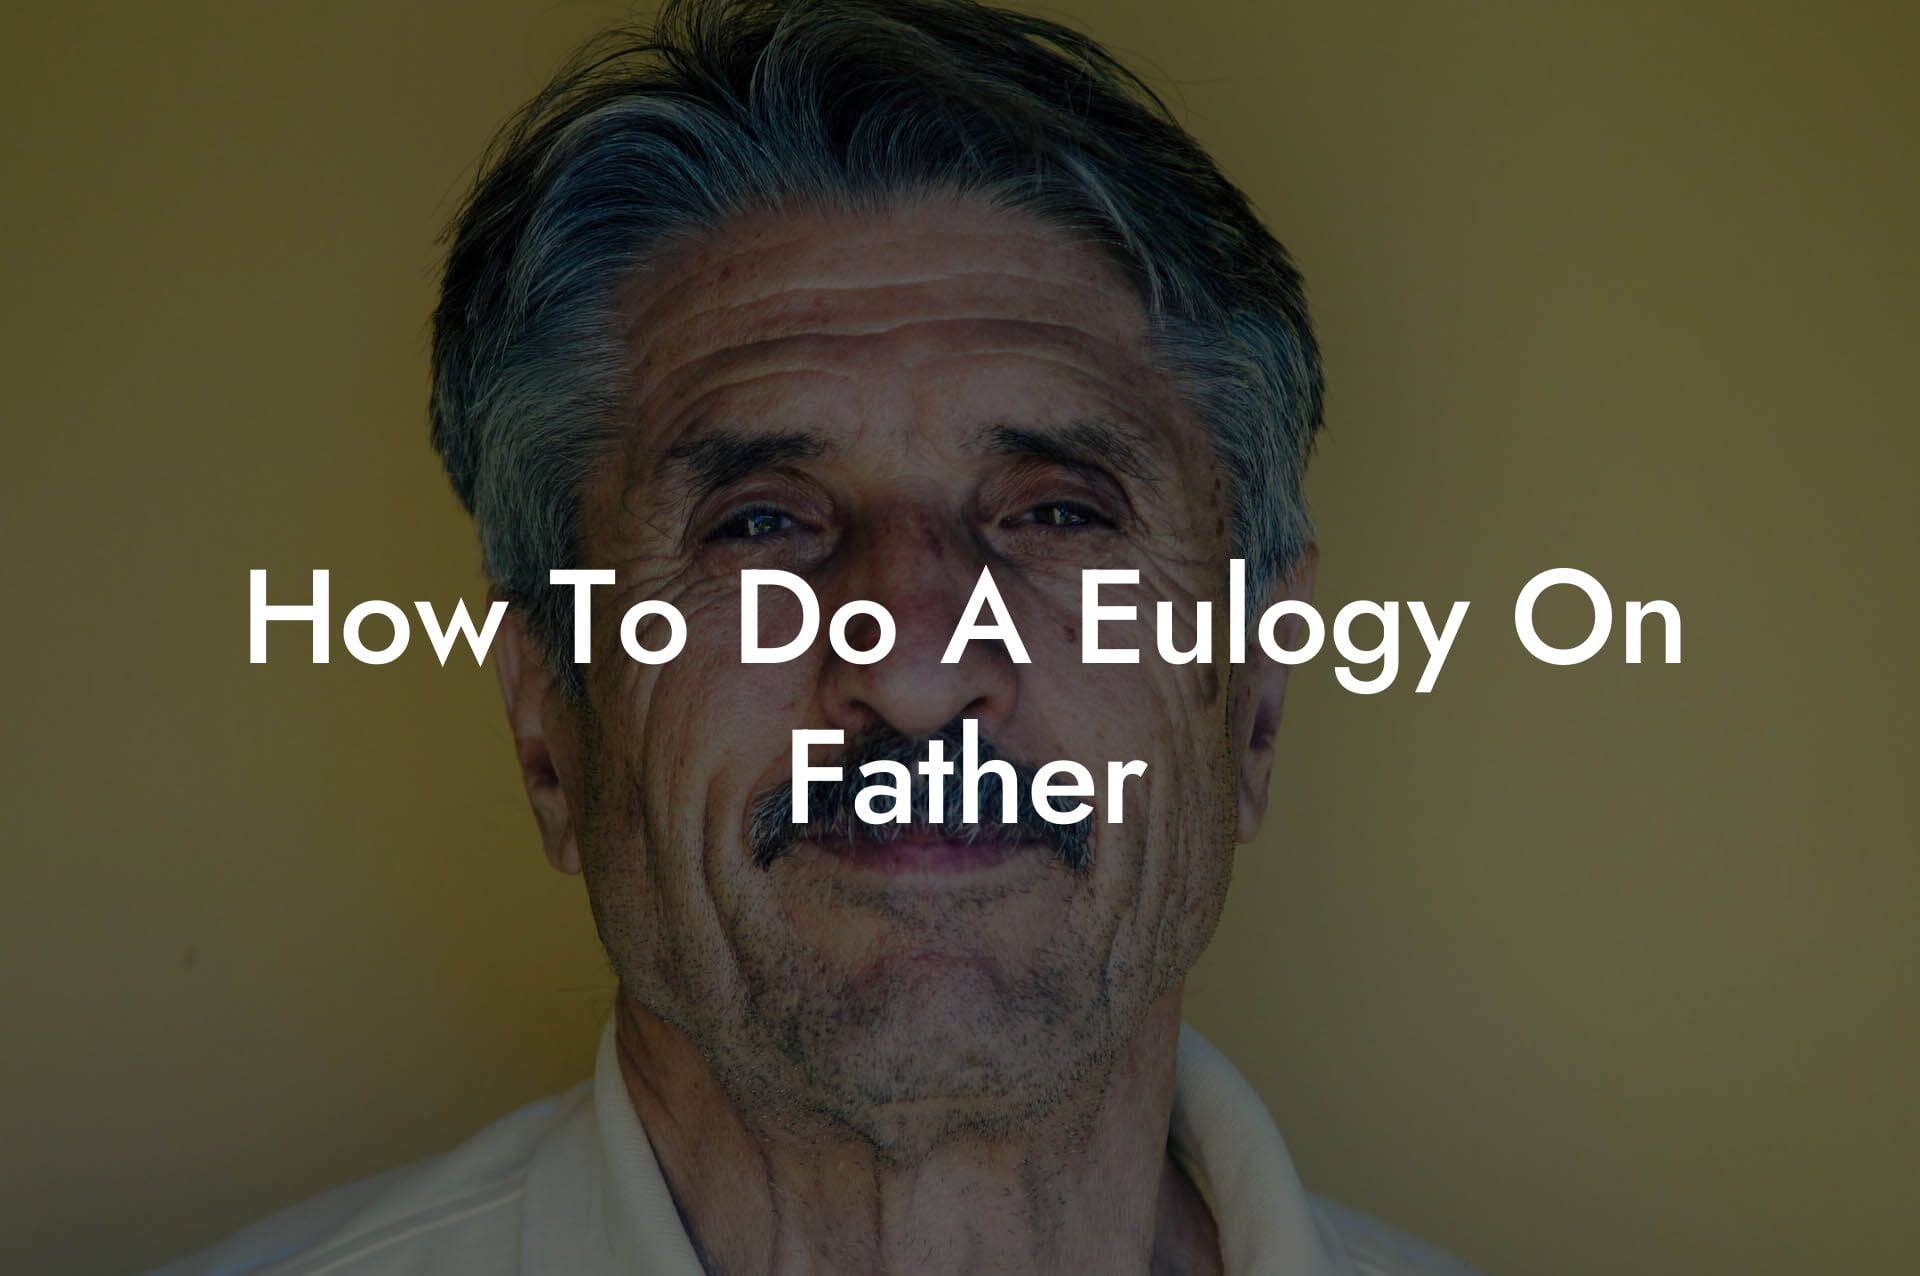 How To Do A Eulogy On Father